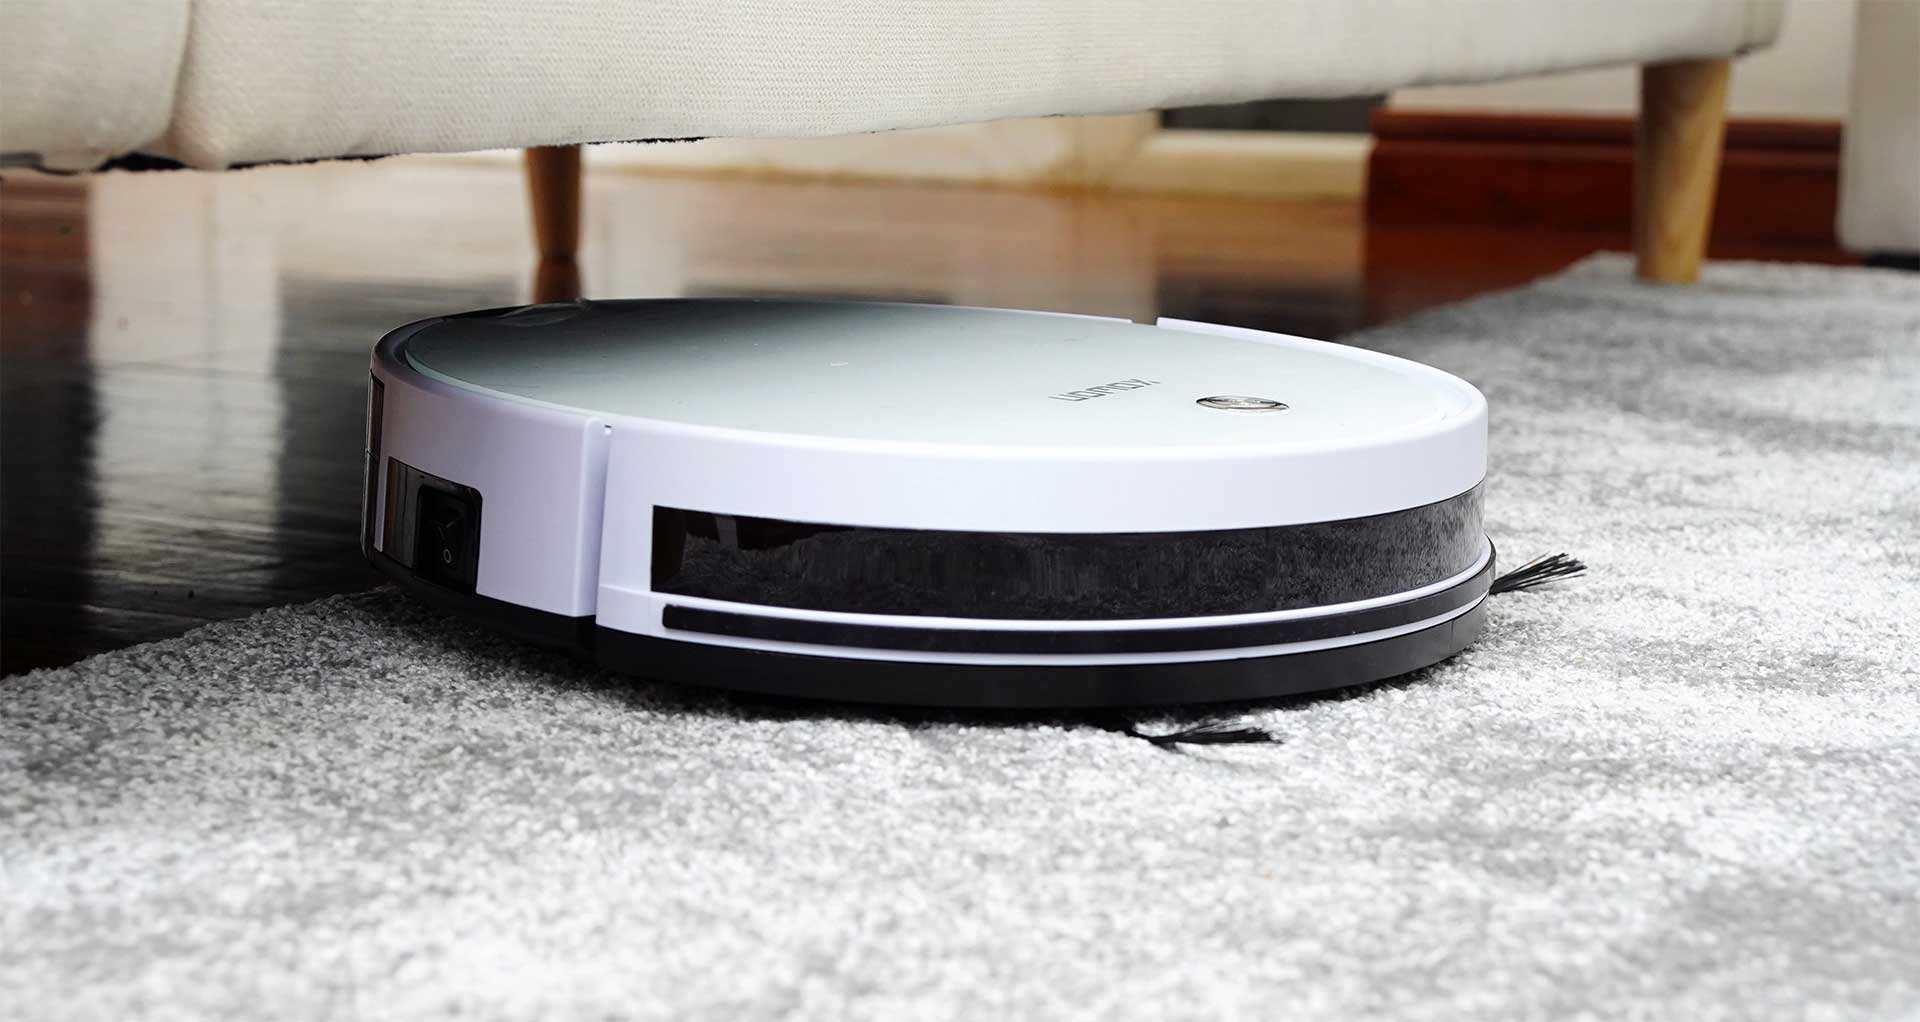 Best Robotic Vacuums Easy to Operate Vacuums for Your Home